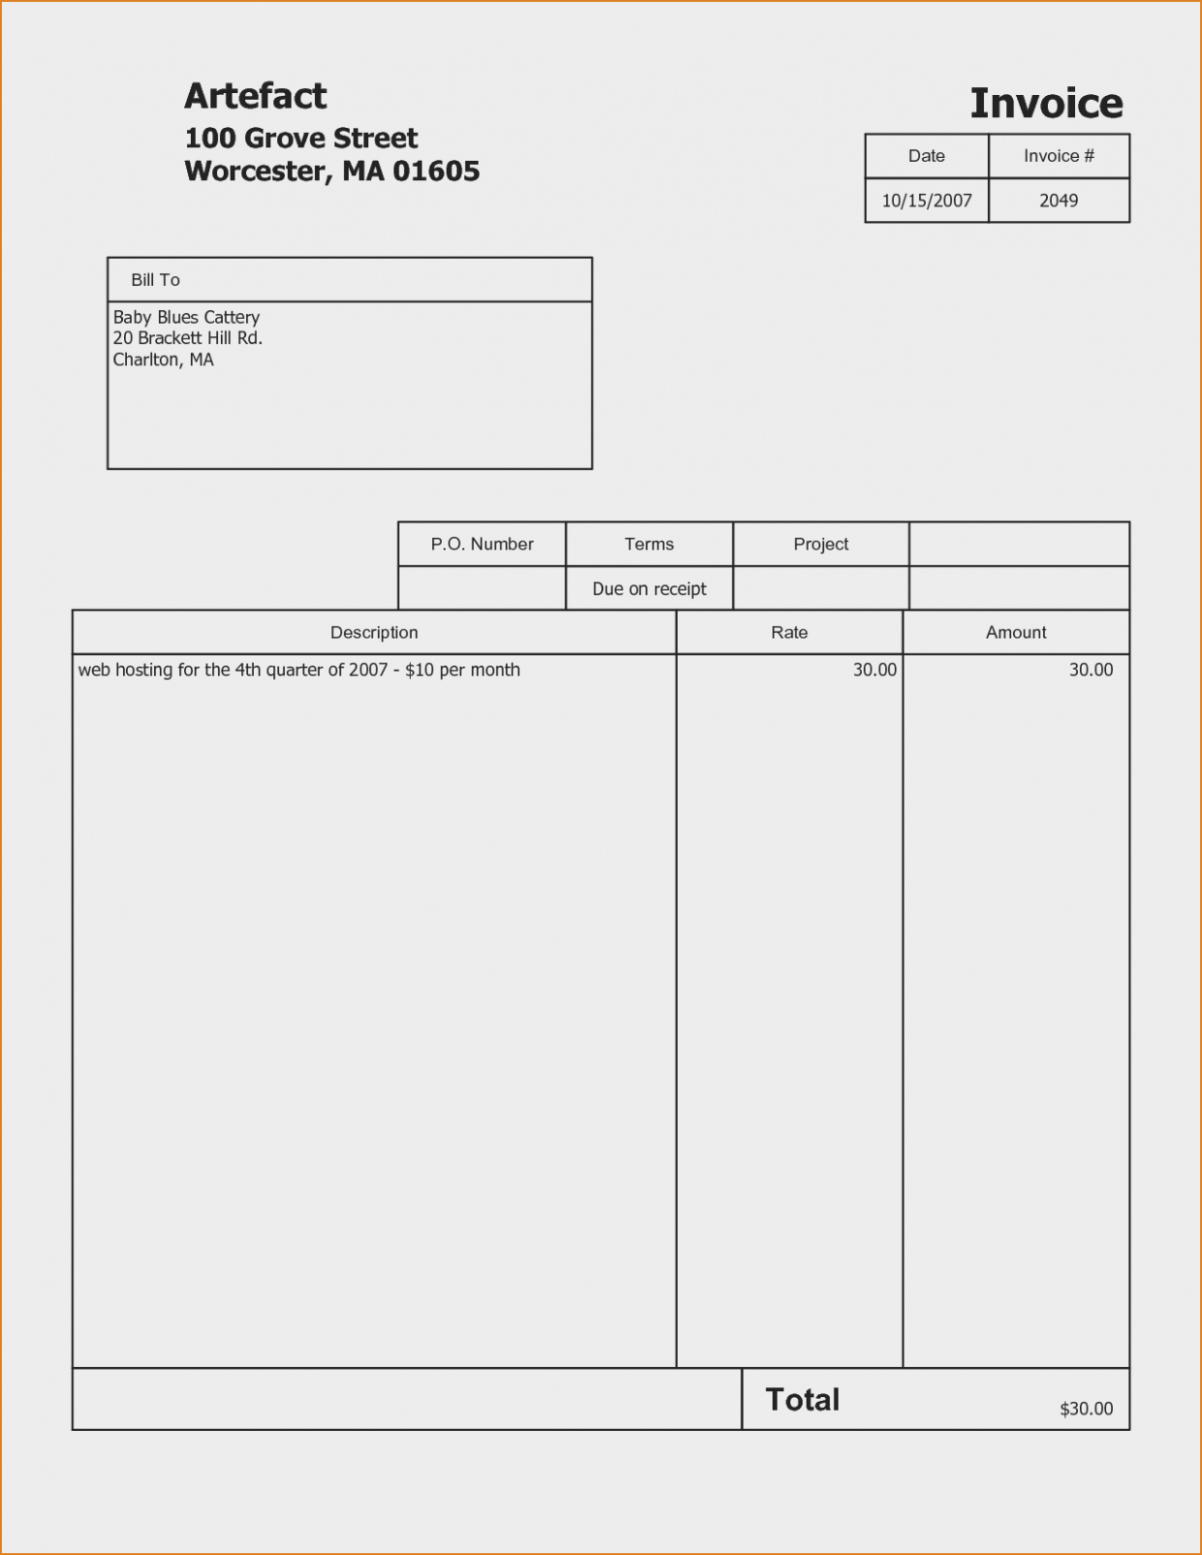 Generic Invoice Template Word Elegant Everything You Need to